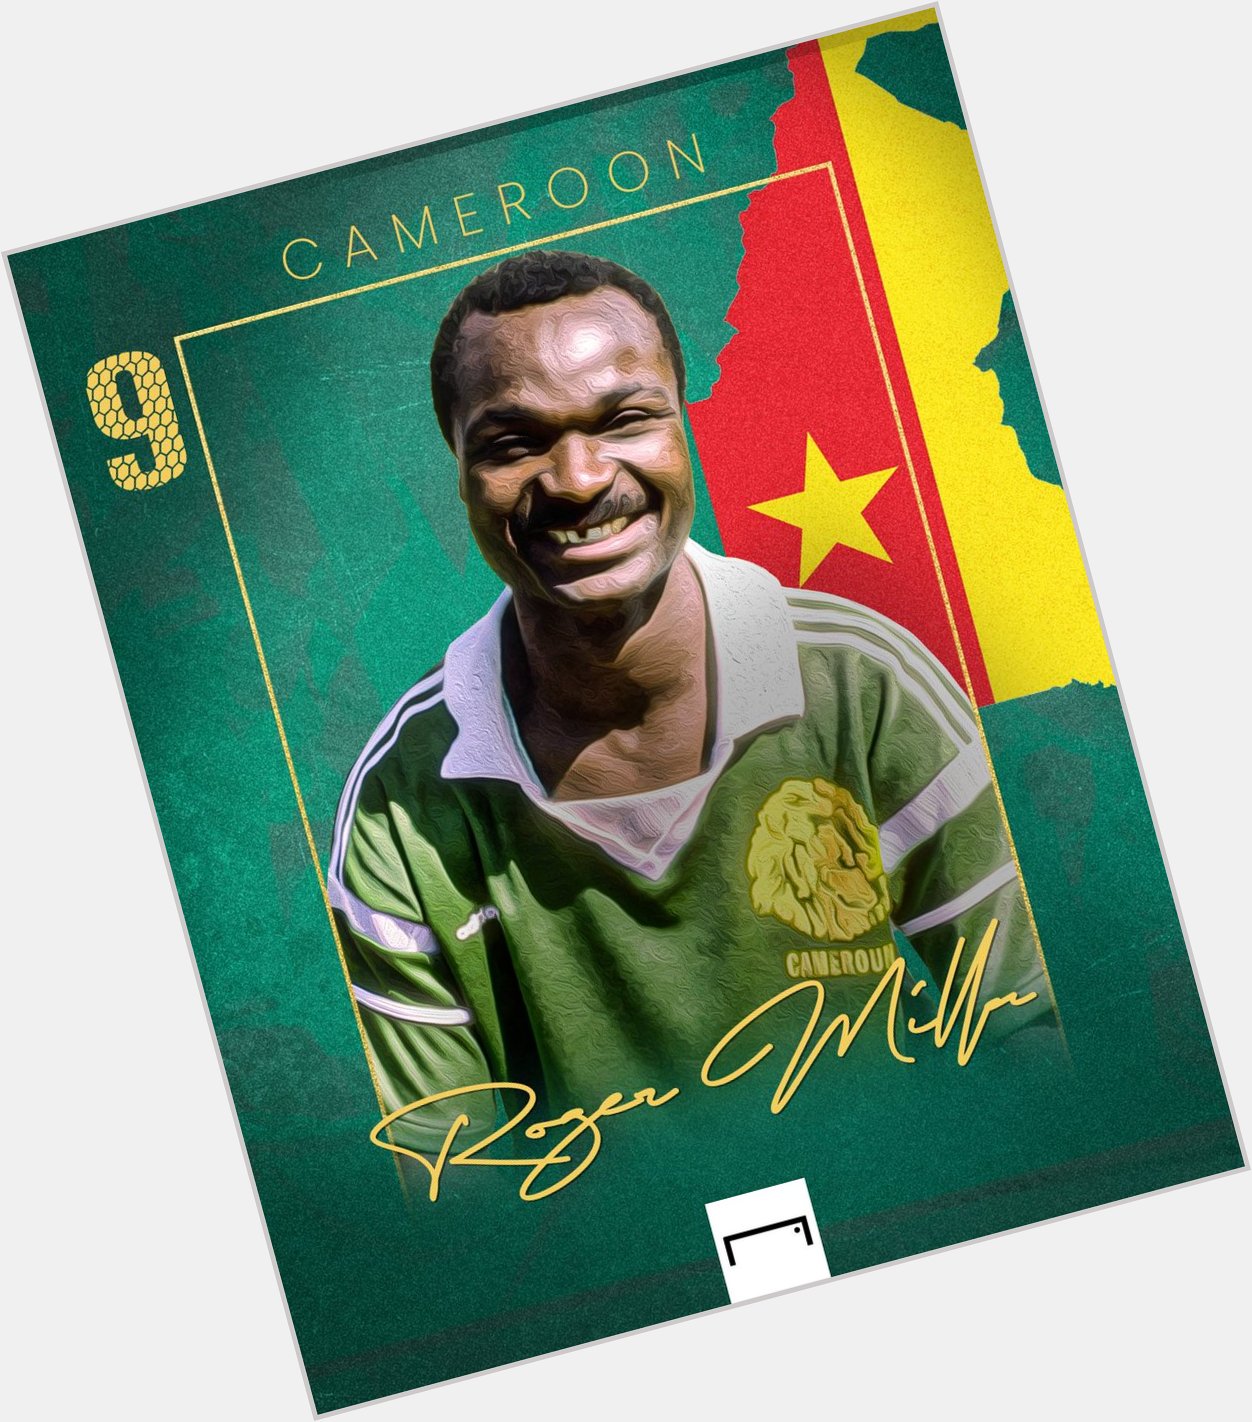                      Join us in wishing former Cameroon international a HAPPY BIRTHDAY  